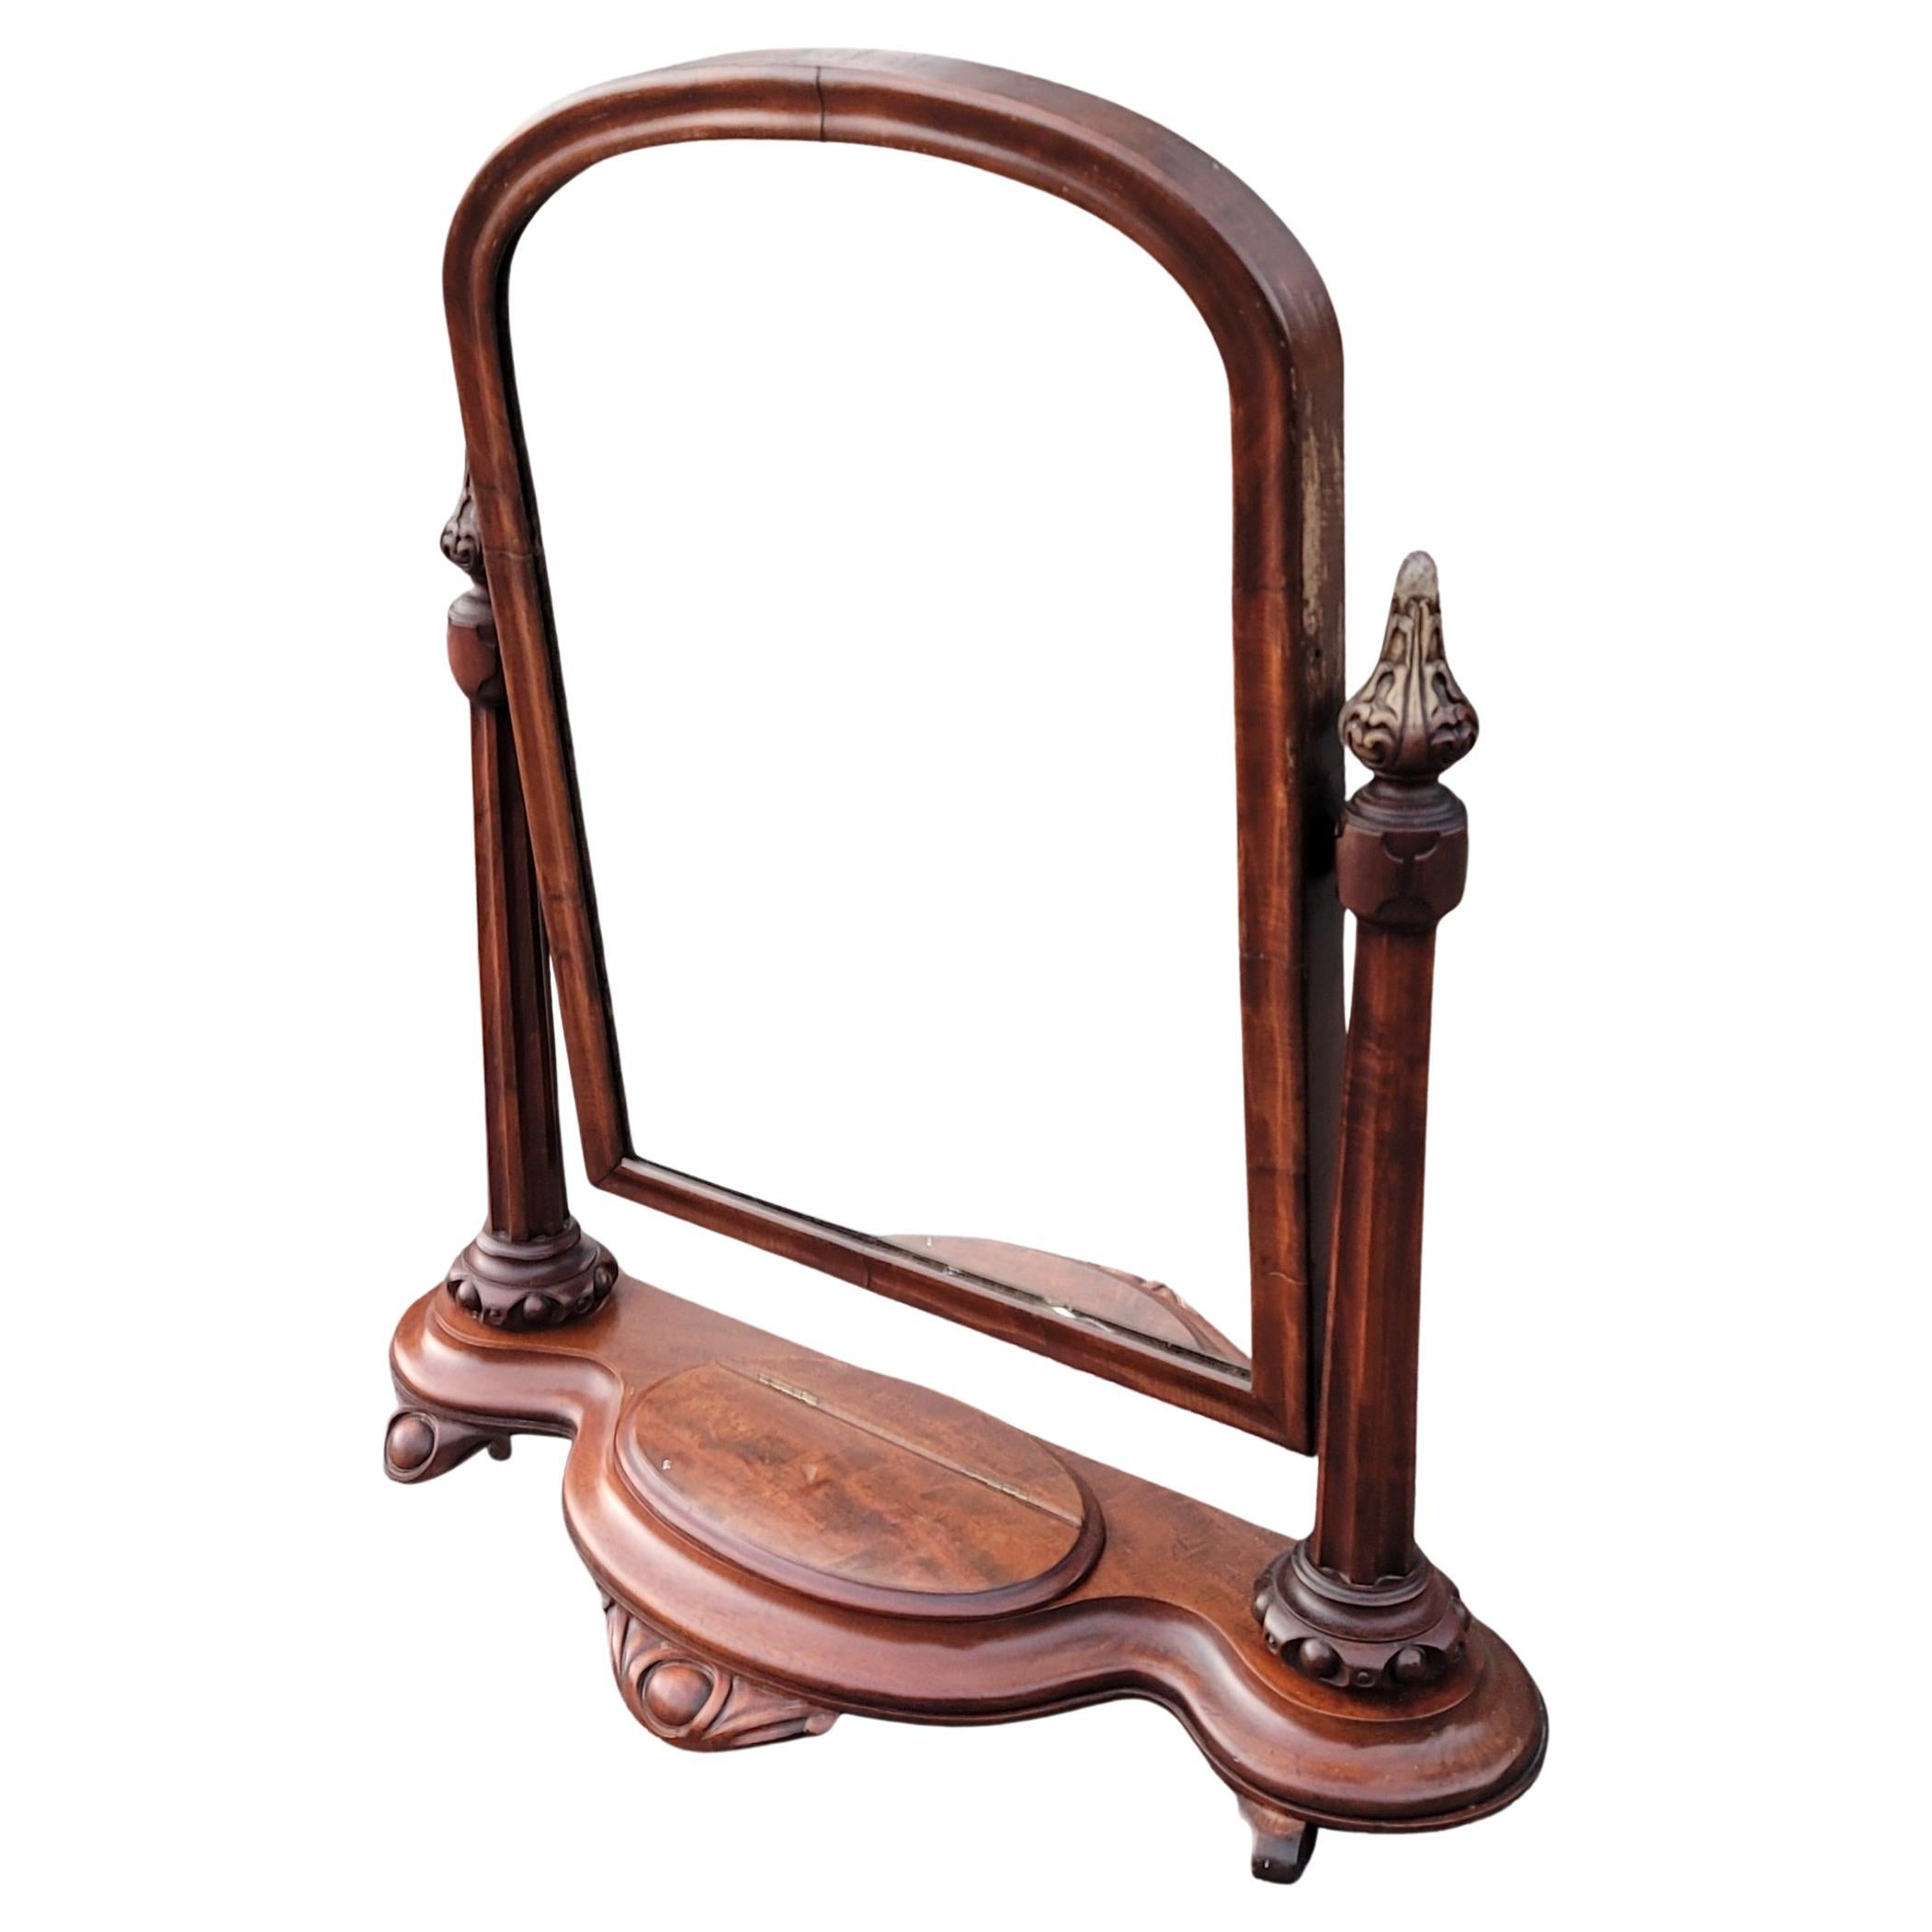 19th Century American Empire gentleman's tilt-top shaving mirror of mahogany. The original mirror glass is in a beveled frame with a dome top and is supported by beautifully crafter upright columns with spire finials. The serpentine shaped base is